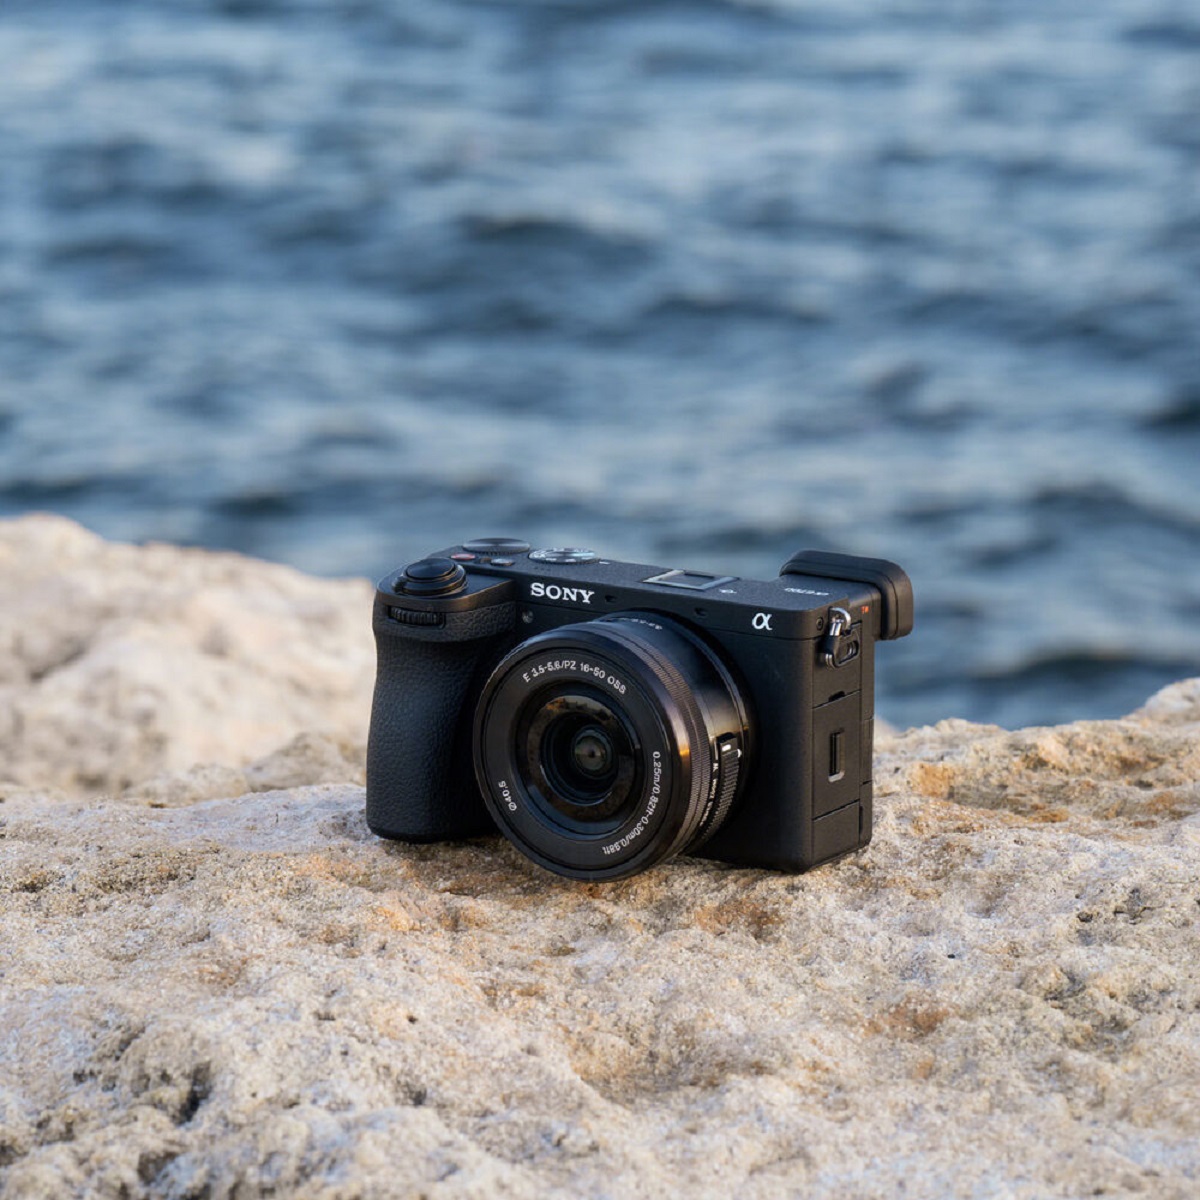 The sony a7ii is sitting on a rock next to the ocean.